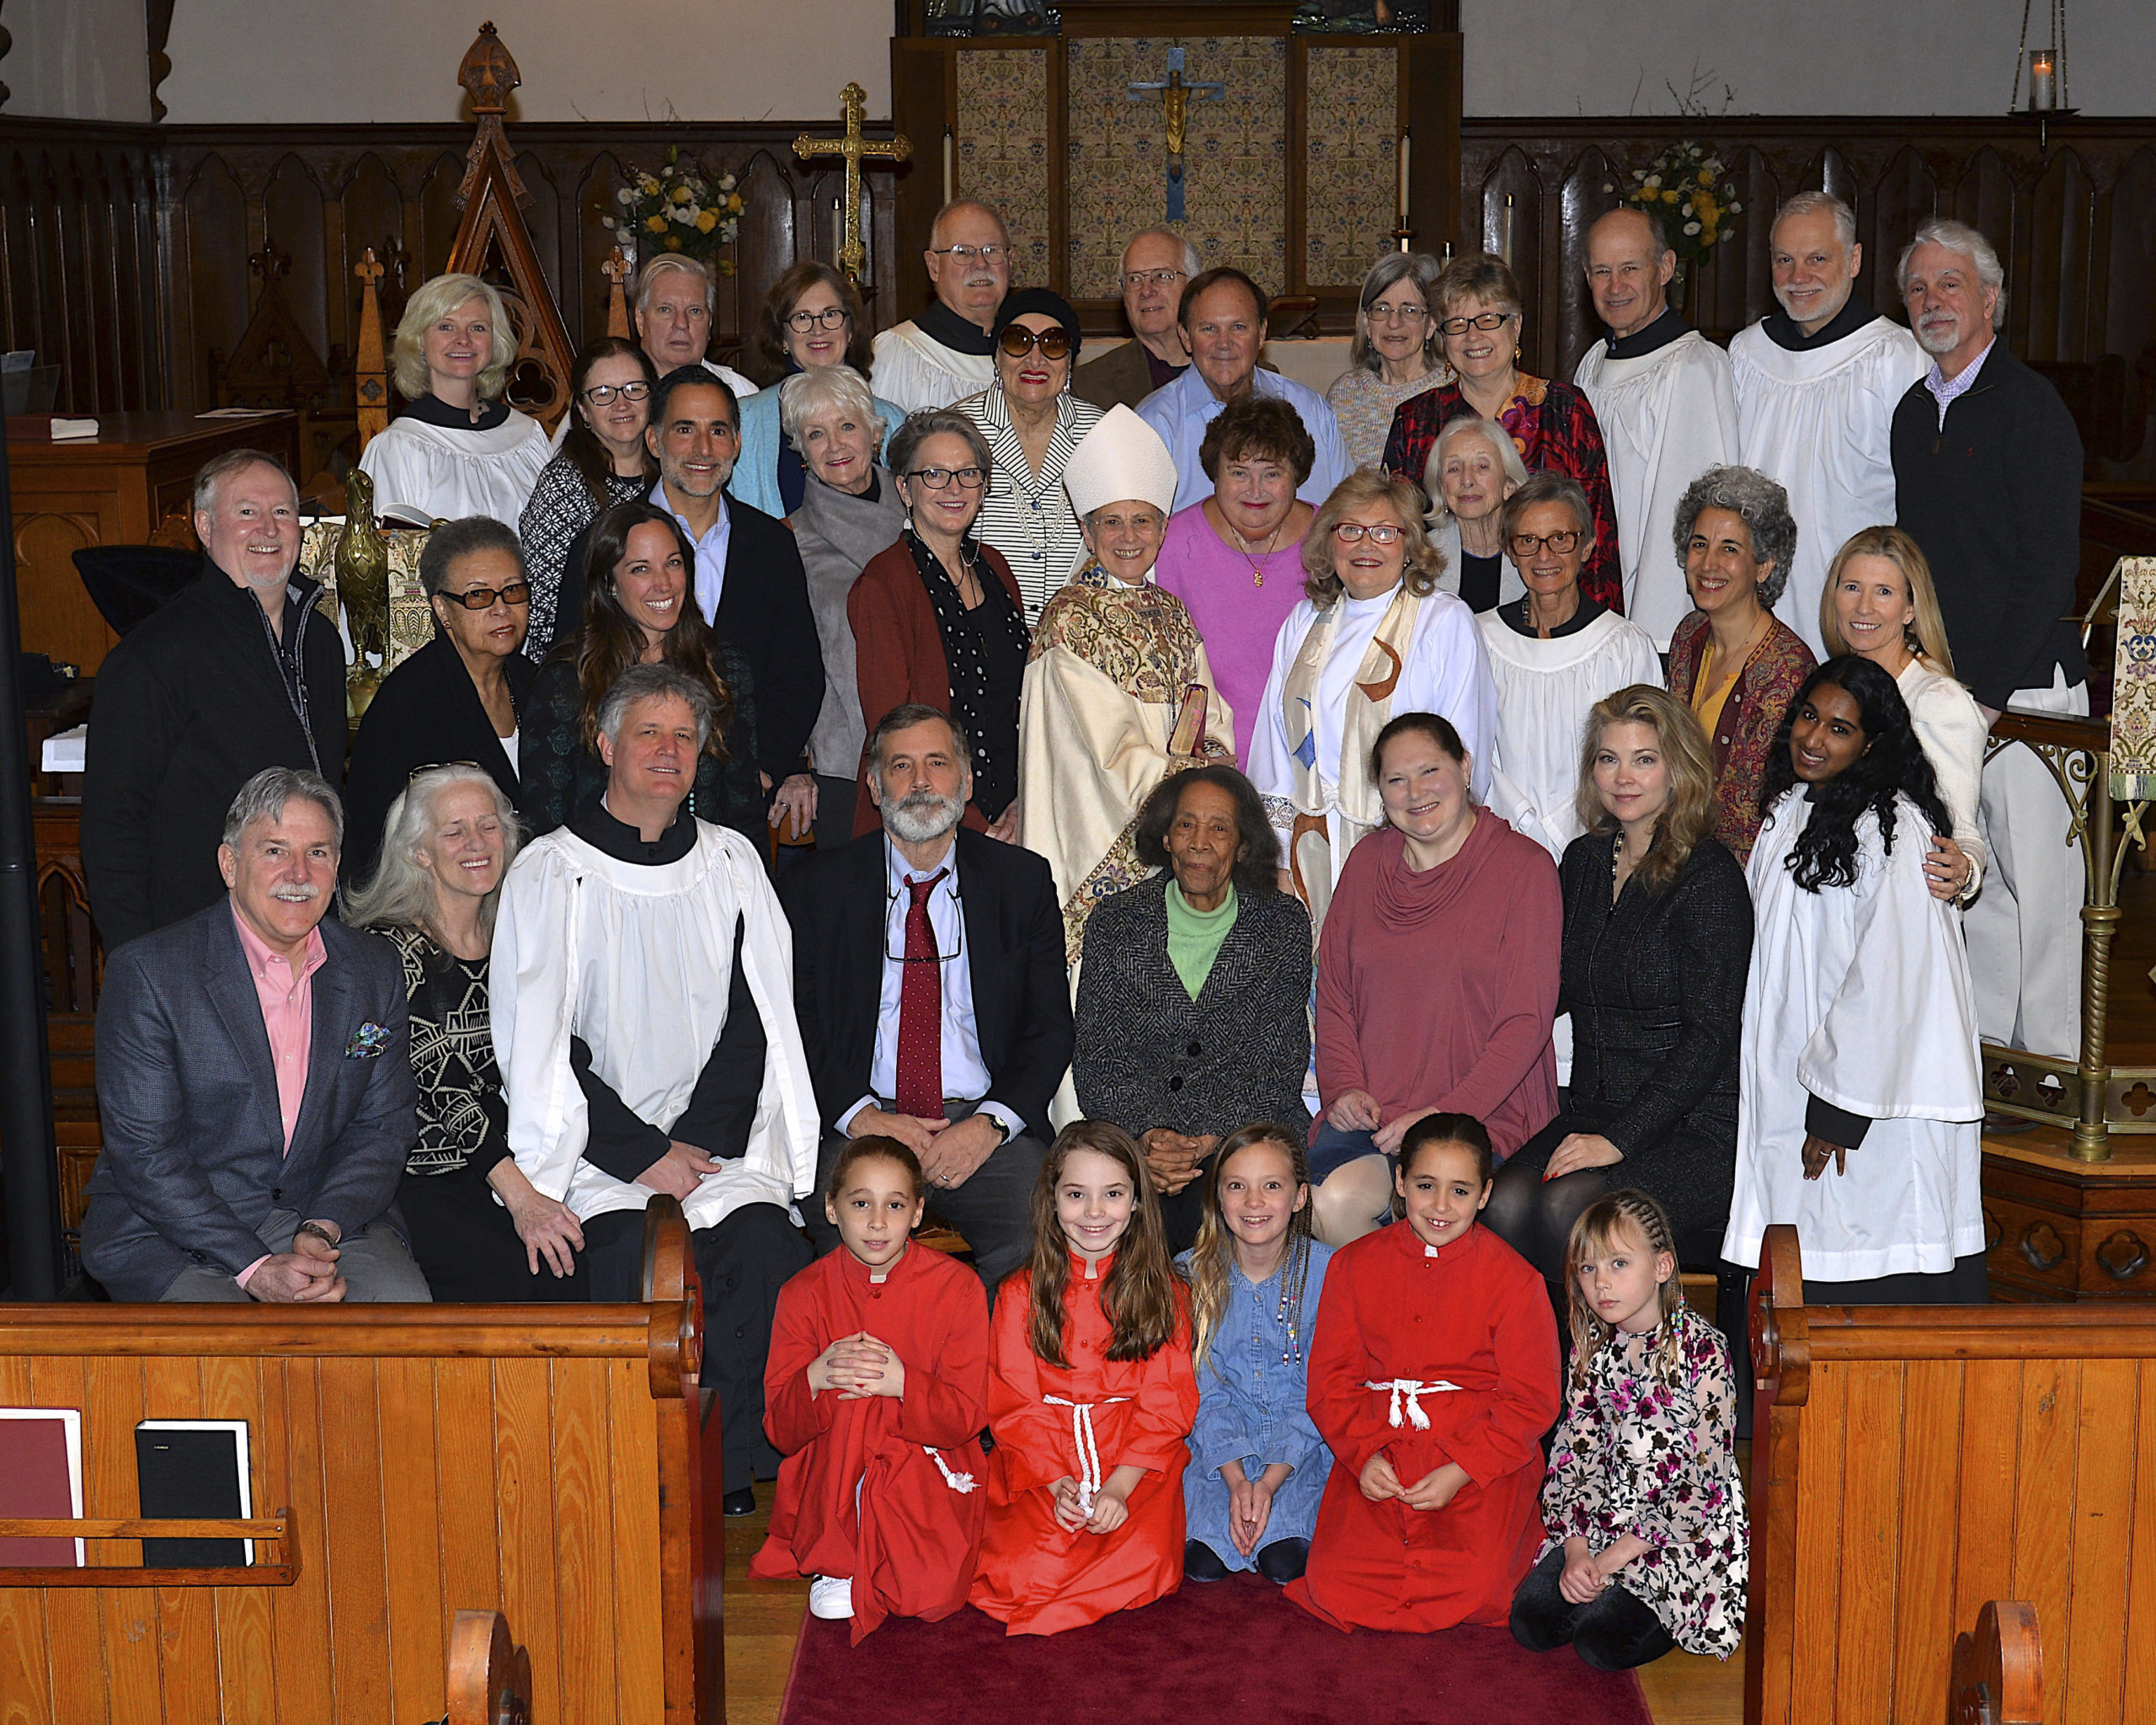 On Sunday February 23rd, the congregation of Christ Episcopal Church at 5 Hampton St. welcomed The Rt Rev. Geralyn Wolf, Assisting Bishop of the Episcopal Diocese of Long Island. She is pictured with the attendees at Sunday’s 10 am service. Following the service the Bishop met with the Church Vestry over lunch to discuss plan’s for the Church’s 175th anniversary celebration this spring and plans for the Church's feeding program, Community Cafe.” KYRIL BROMLEY